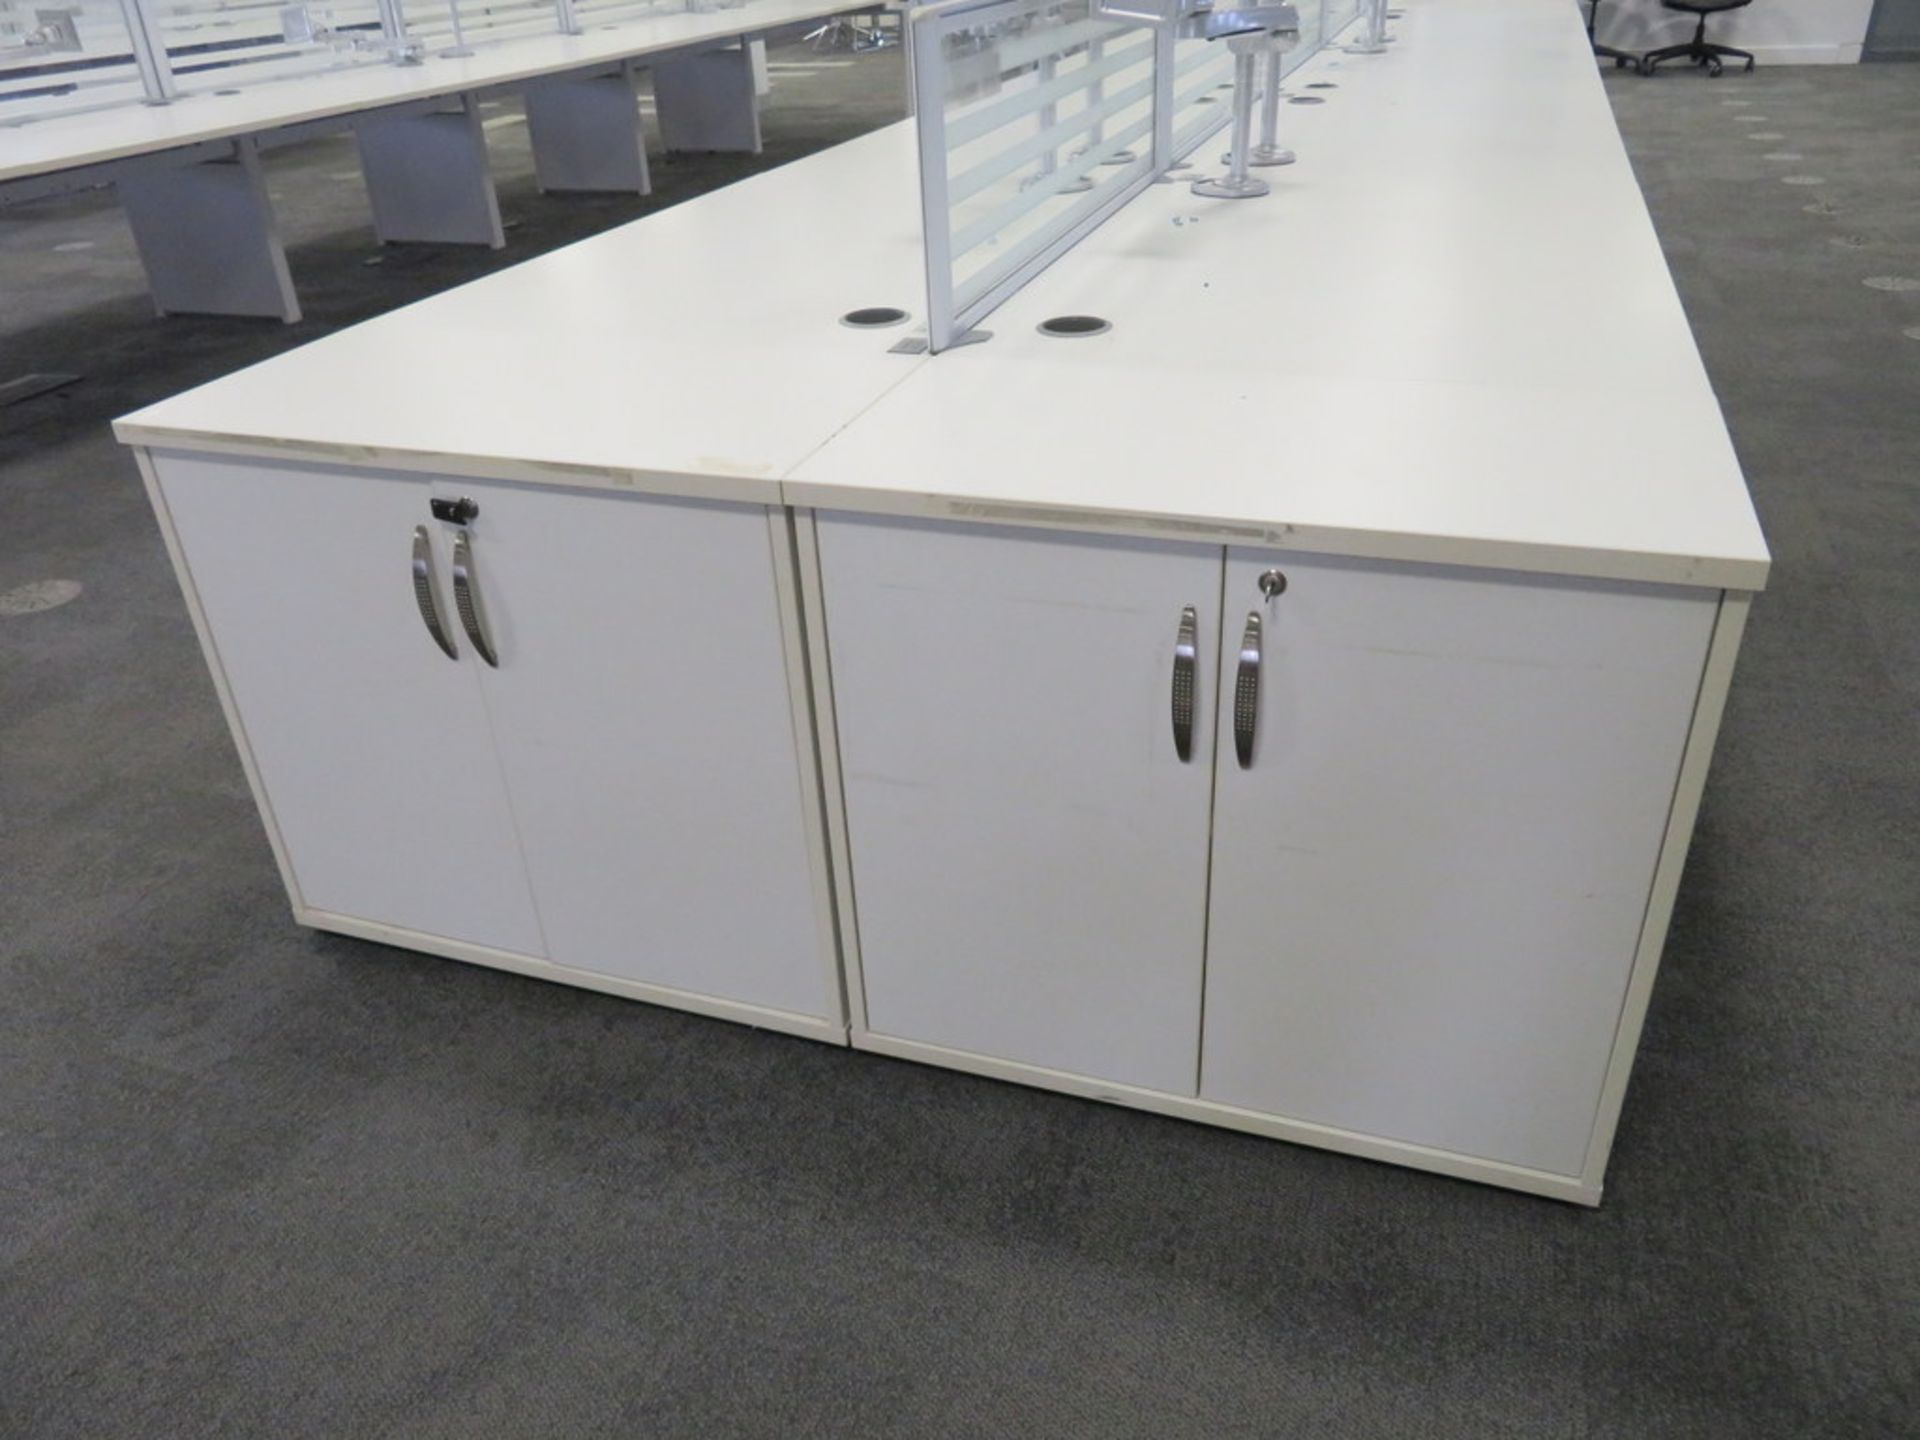 12 Person Desk Arrangement With Dividers, Monitor Arms & Storage Cupboards. - Image 5 of 5